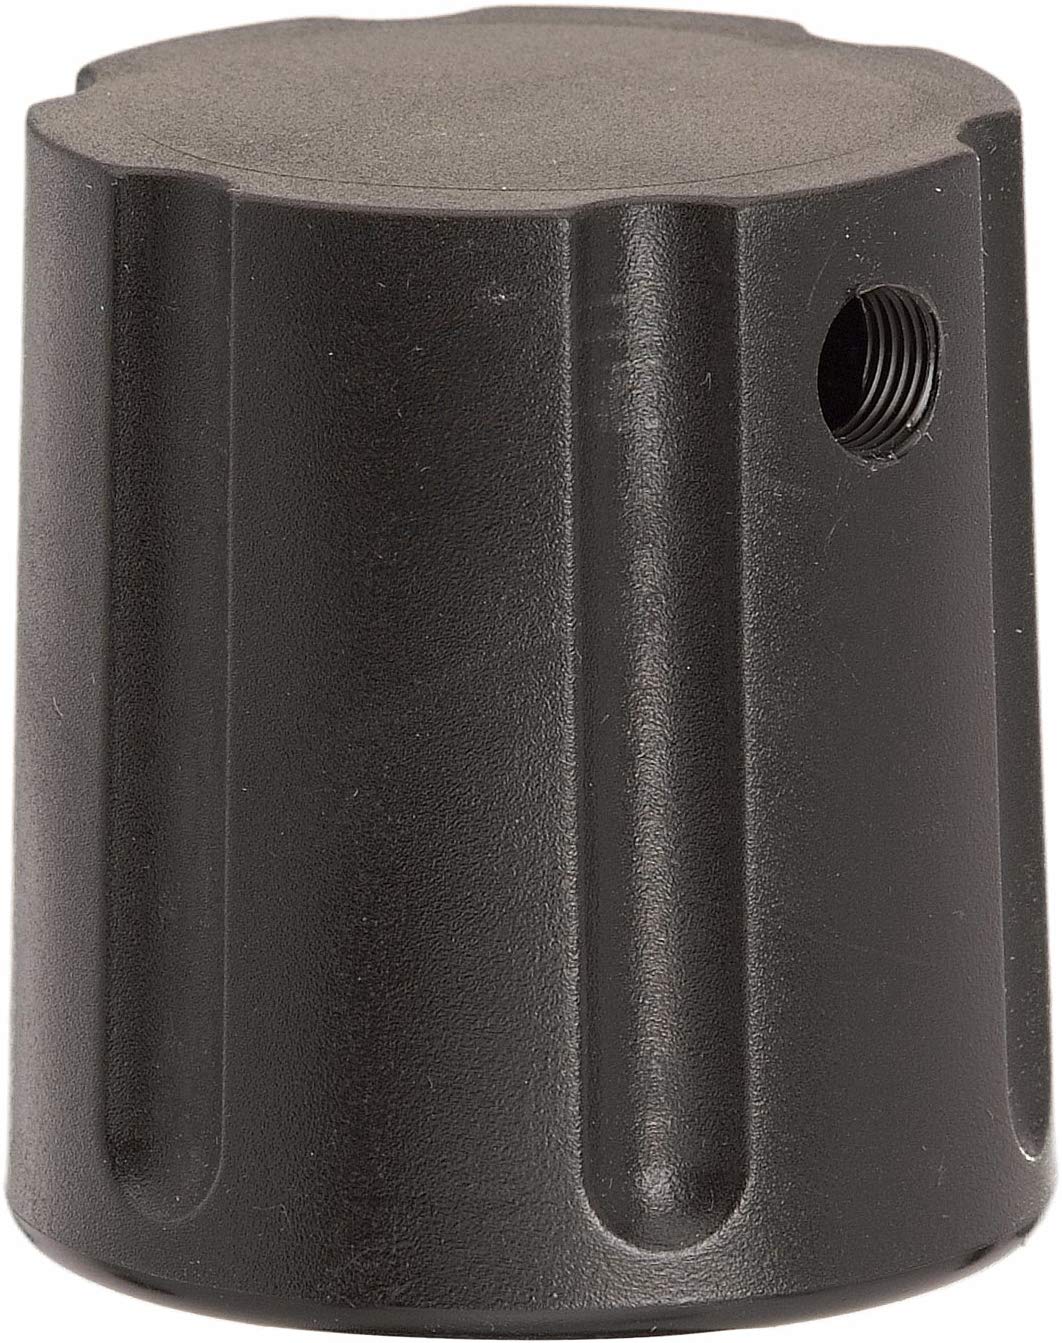 Stant 12410 Fuel Cap Tester replacement Adapter